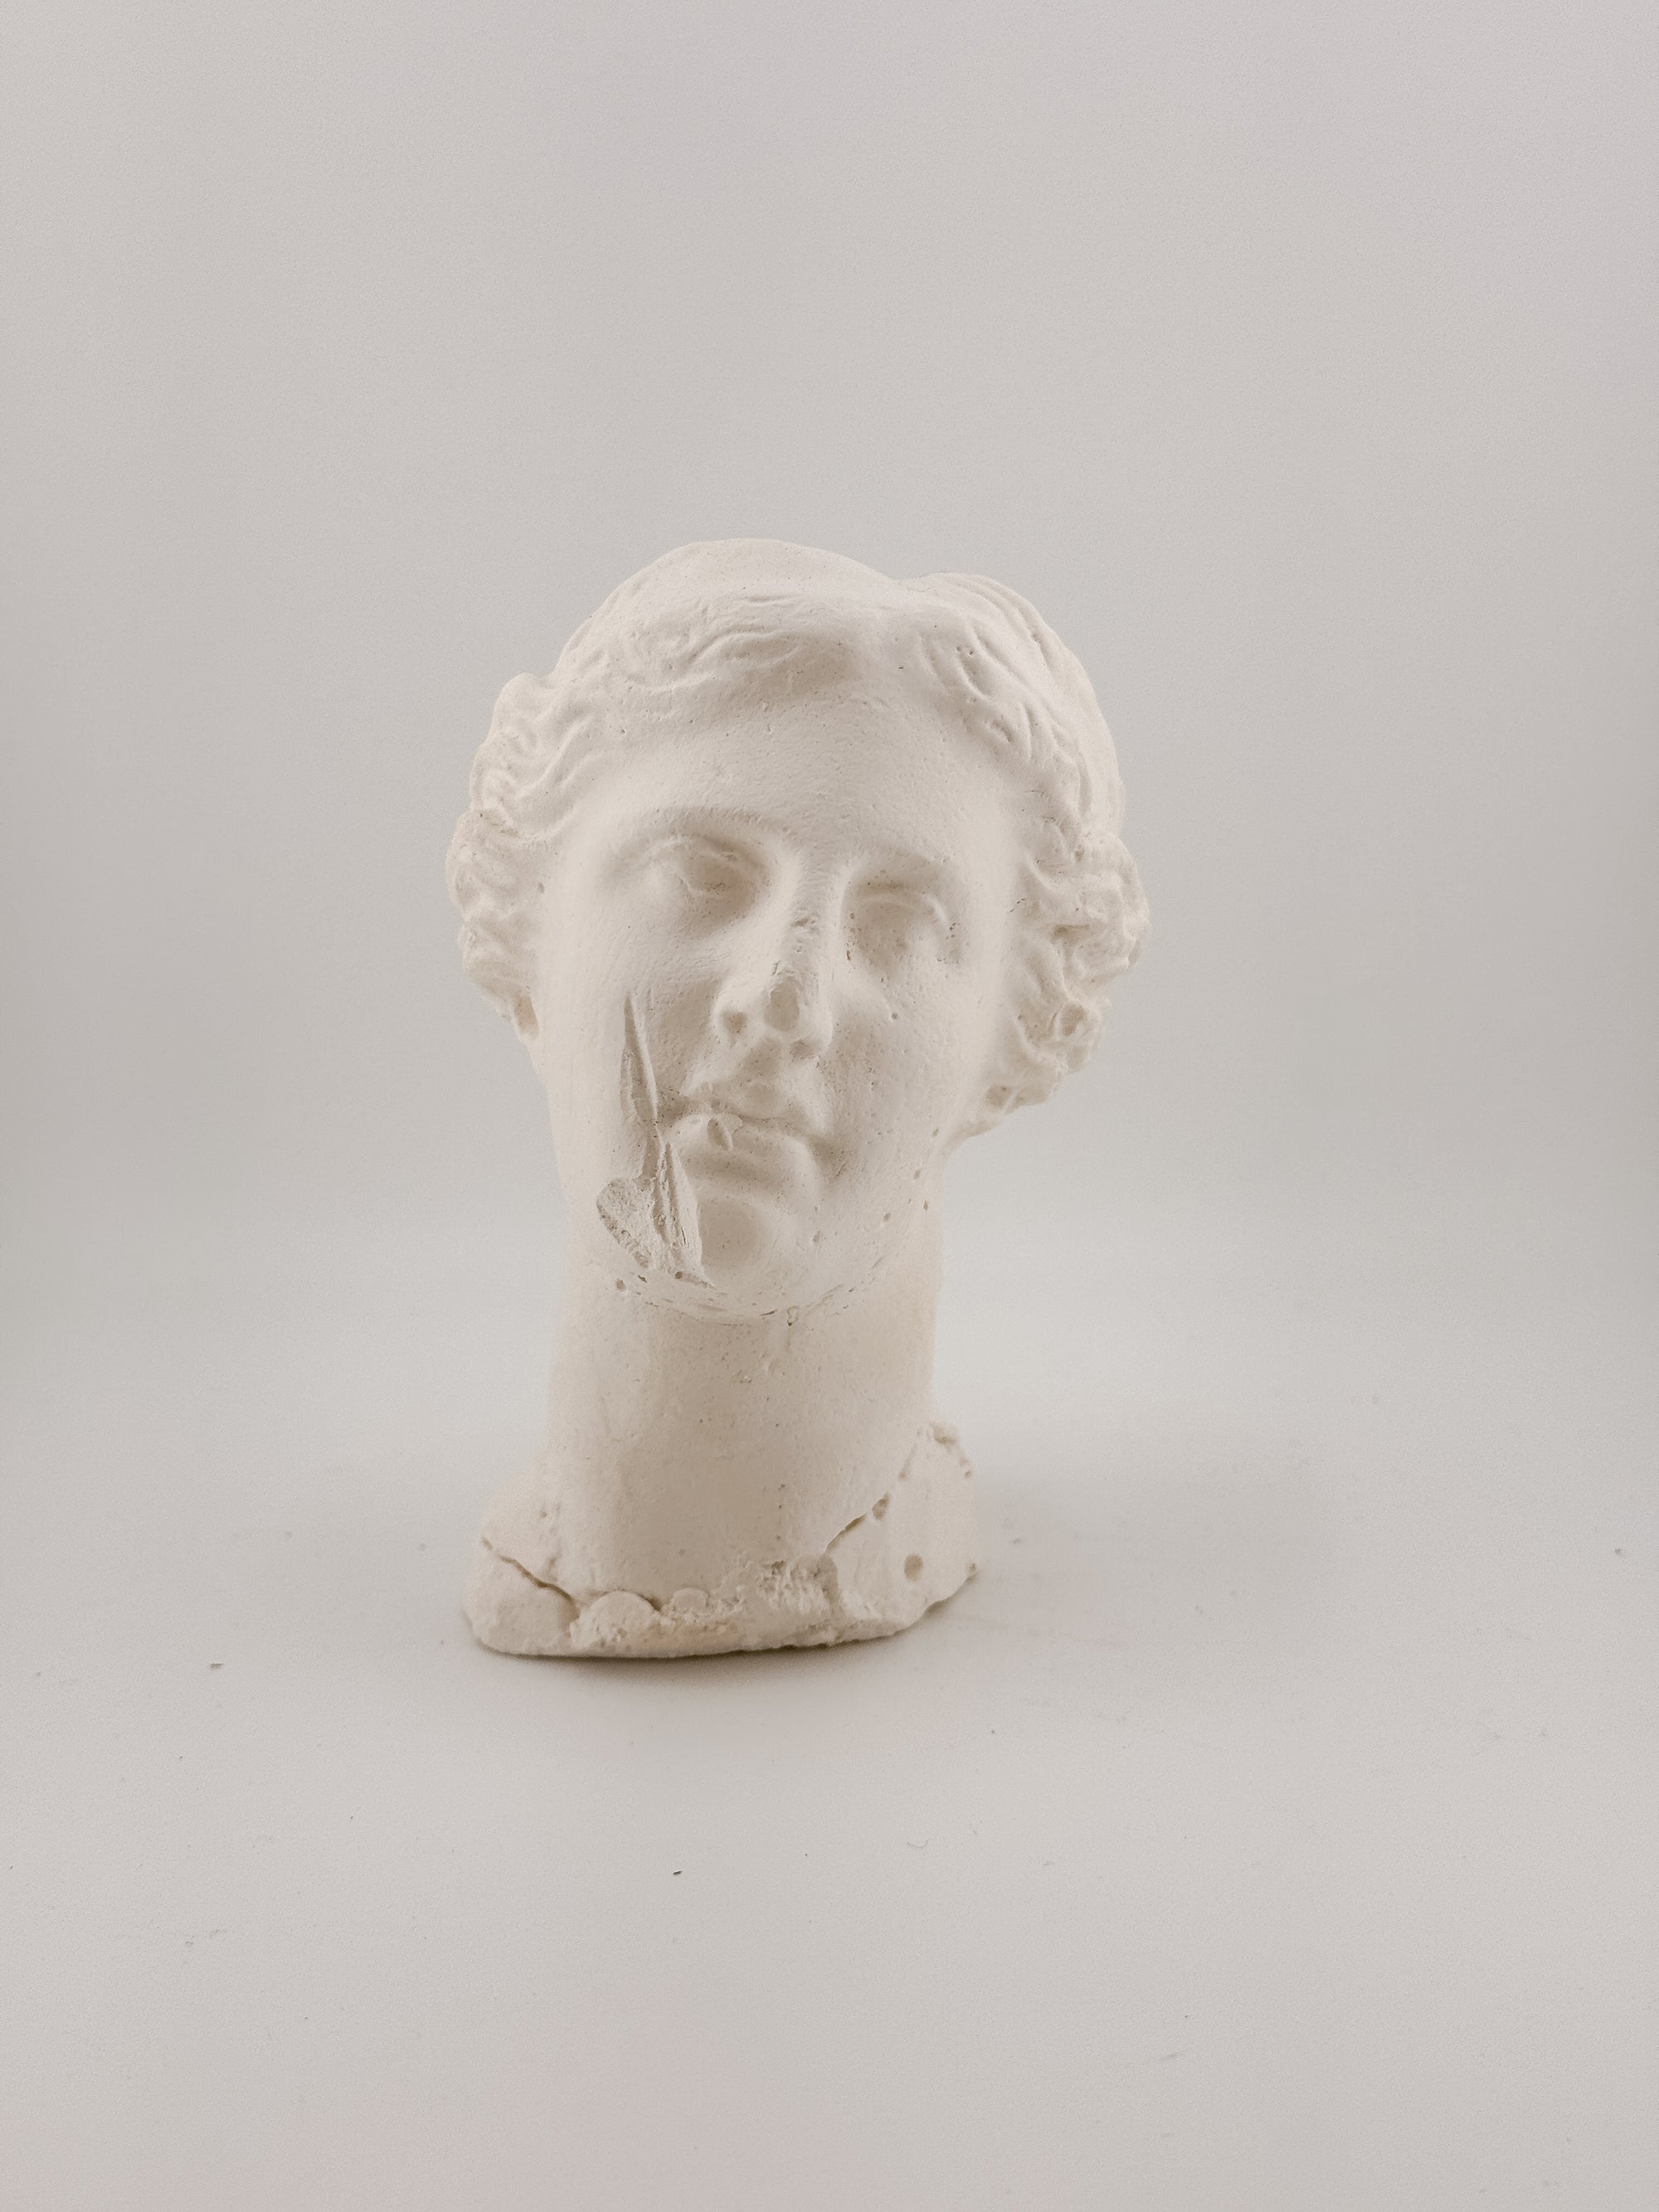 Plaster Busts